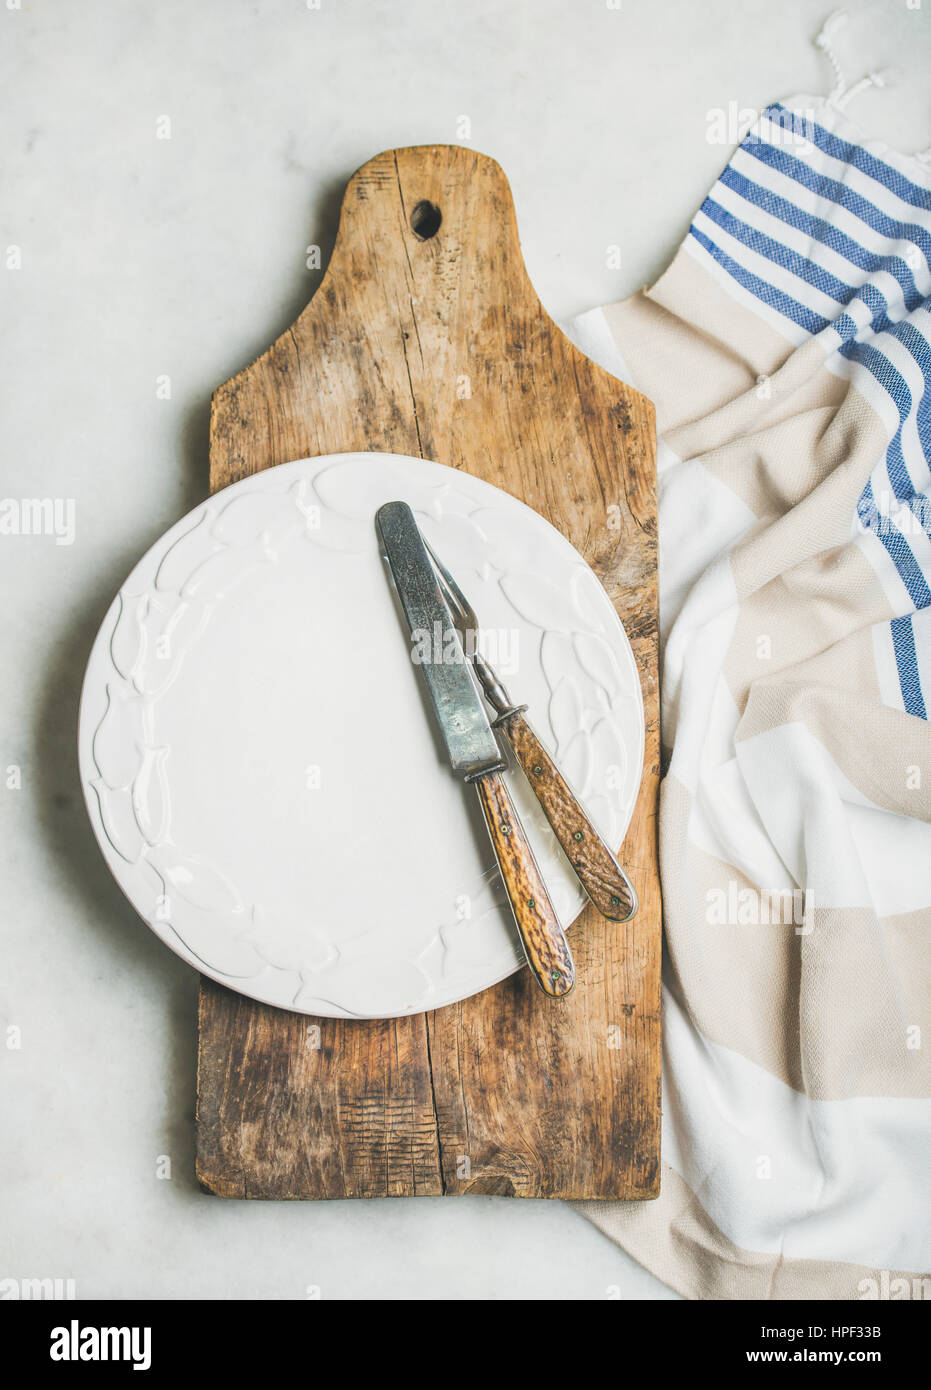 Mediterranean style table setting. Rustic wooden chopping board, white ceramic dinner plate, vintage cutlery and striped blue and white towel over gre Stock Photo